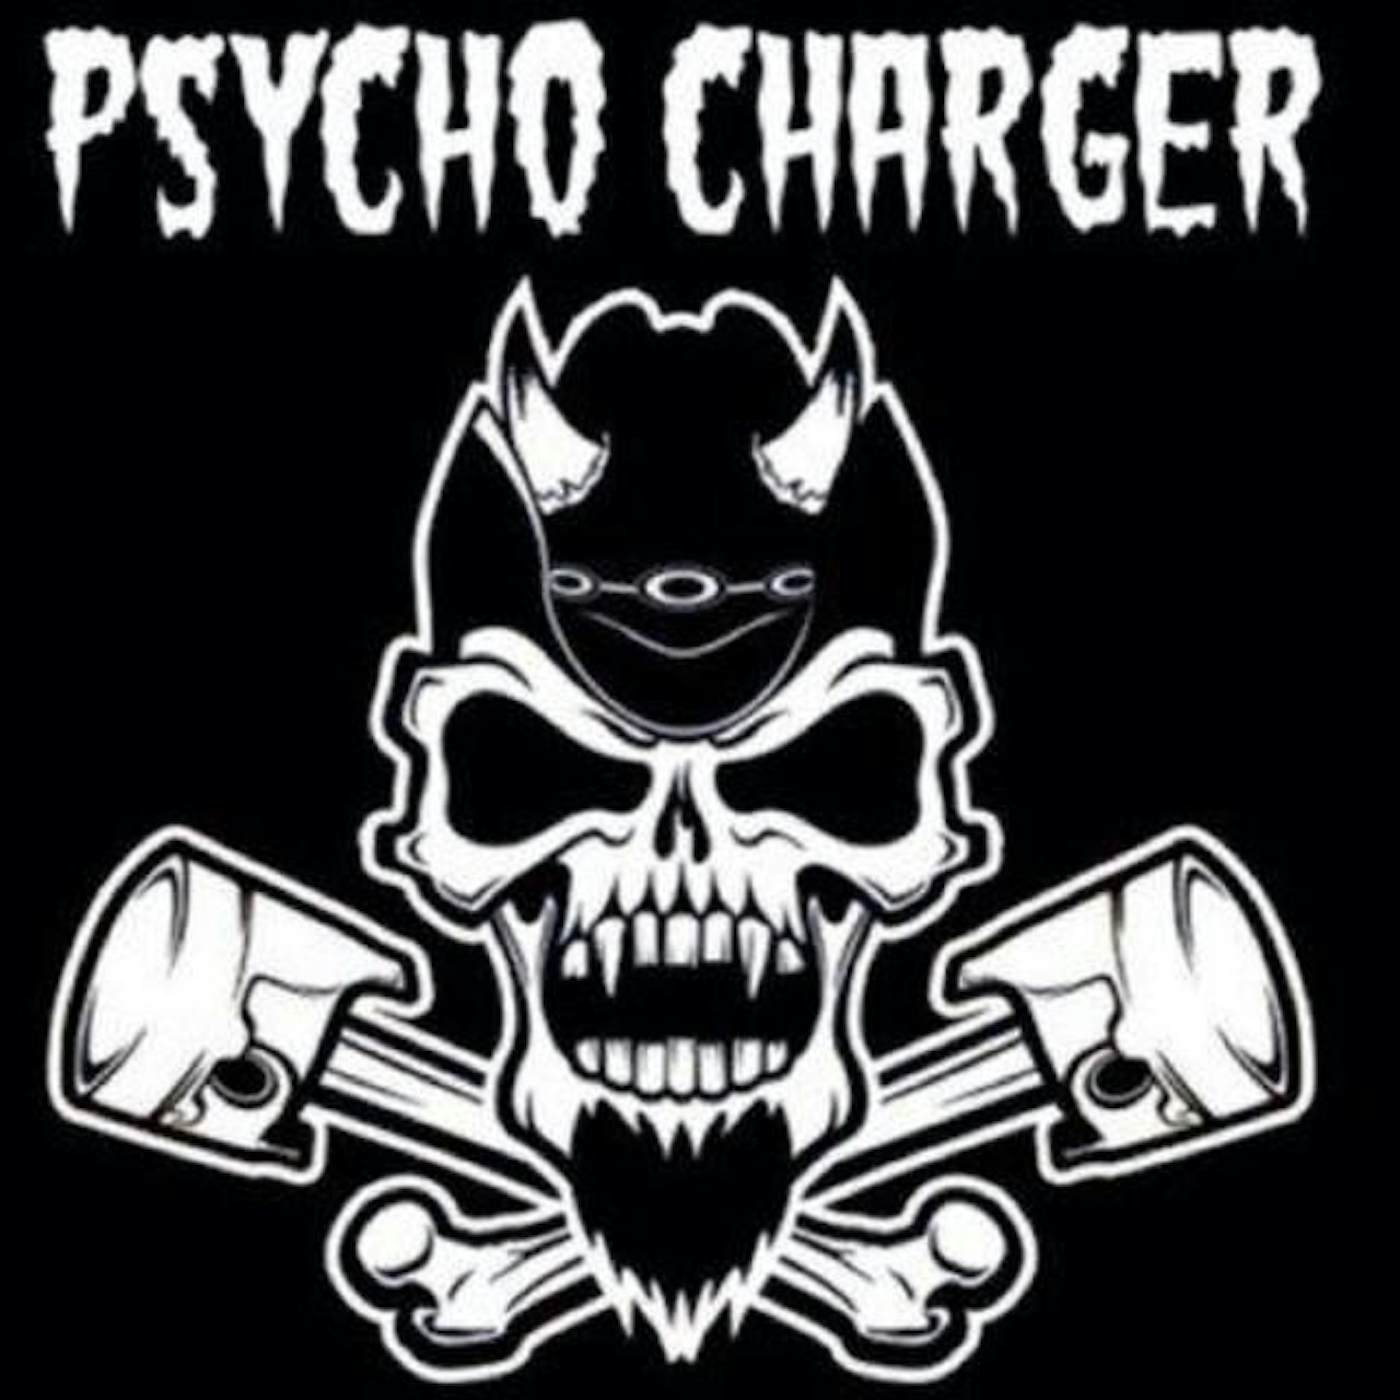 Psycho Charger